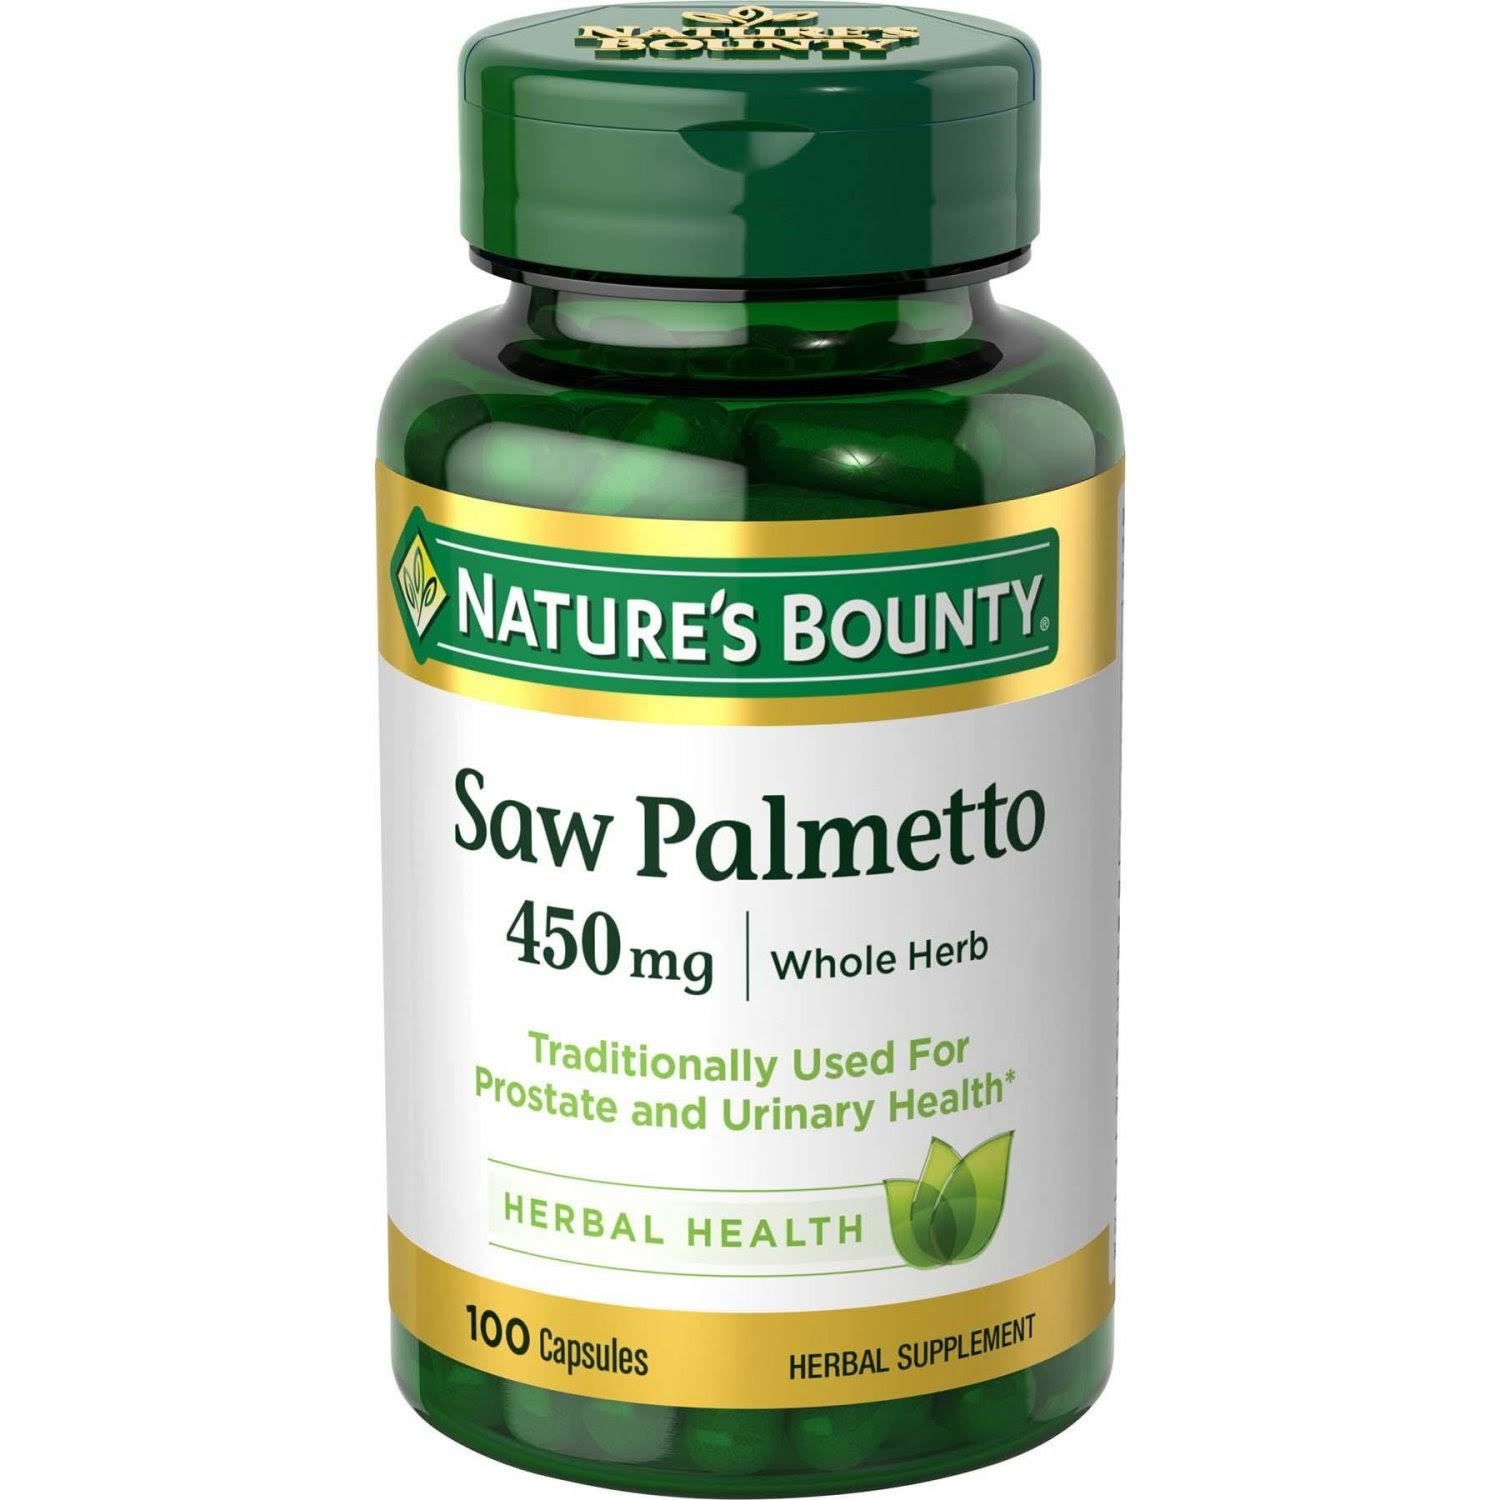 Nature's Bounty Saw Palmetto Supplement - 450mg, 100 Caps